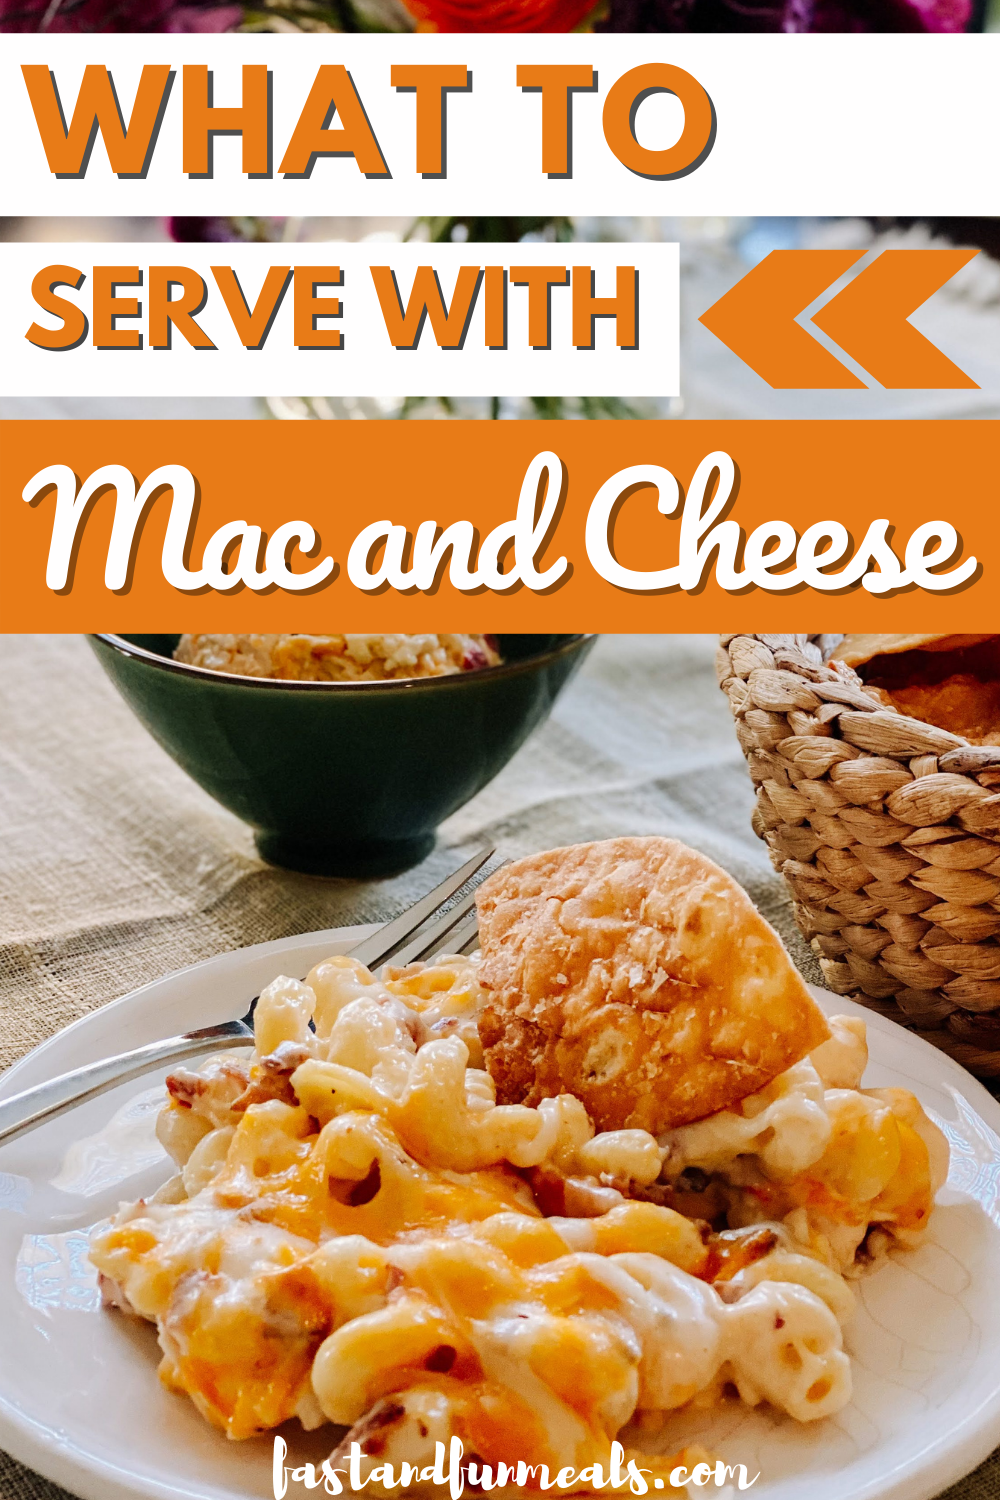 Pin showing the title What to Serve With Mac and Cheese